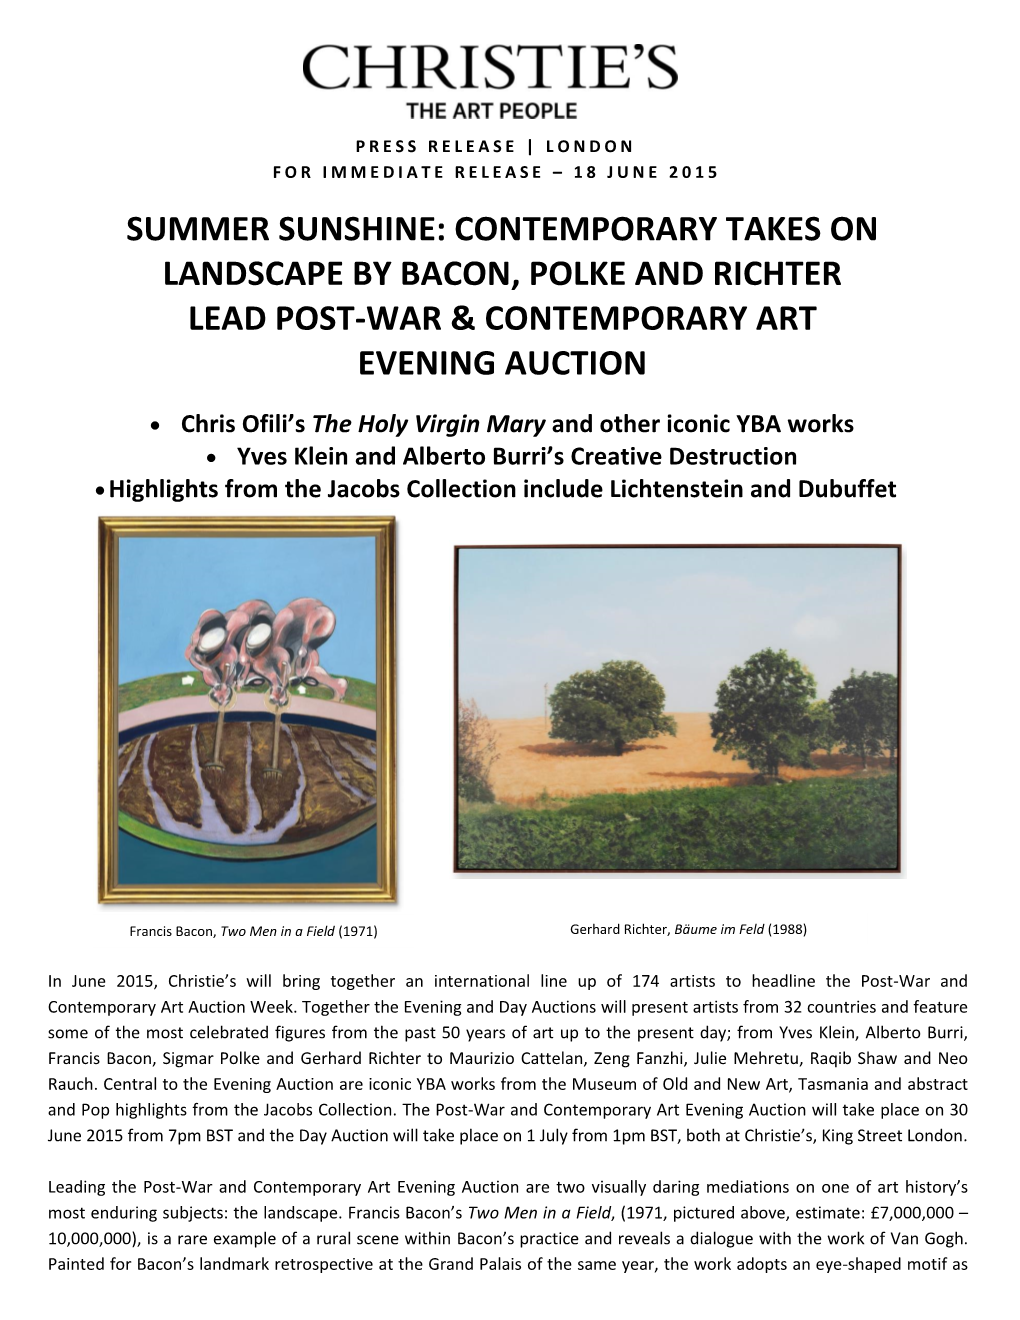 Summer Sunshine: Contemporary Takes on Landscape by Bacon, Polke and Richter Lead Post-War & Contemporary Art Evening Auction